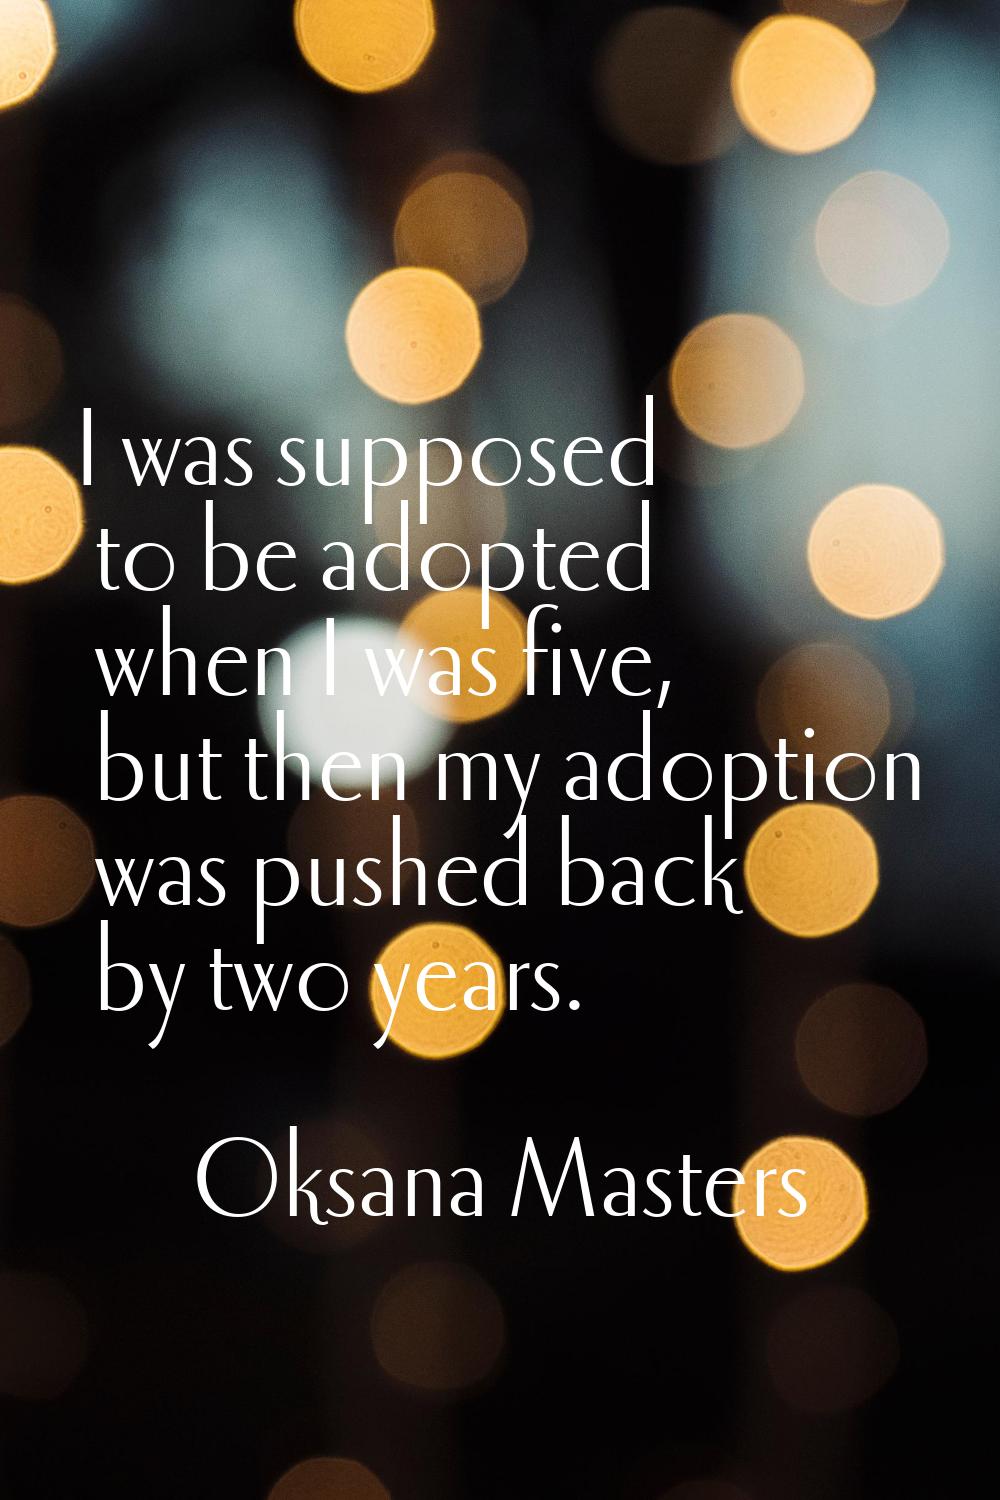 I was supposed to be adopted when I was five, but then my adoption was pushed back by two years.